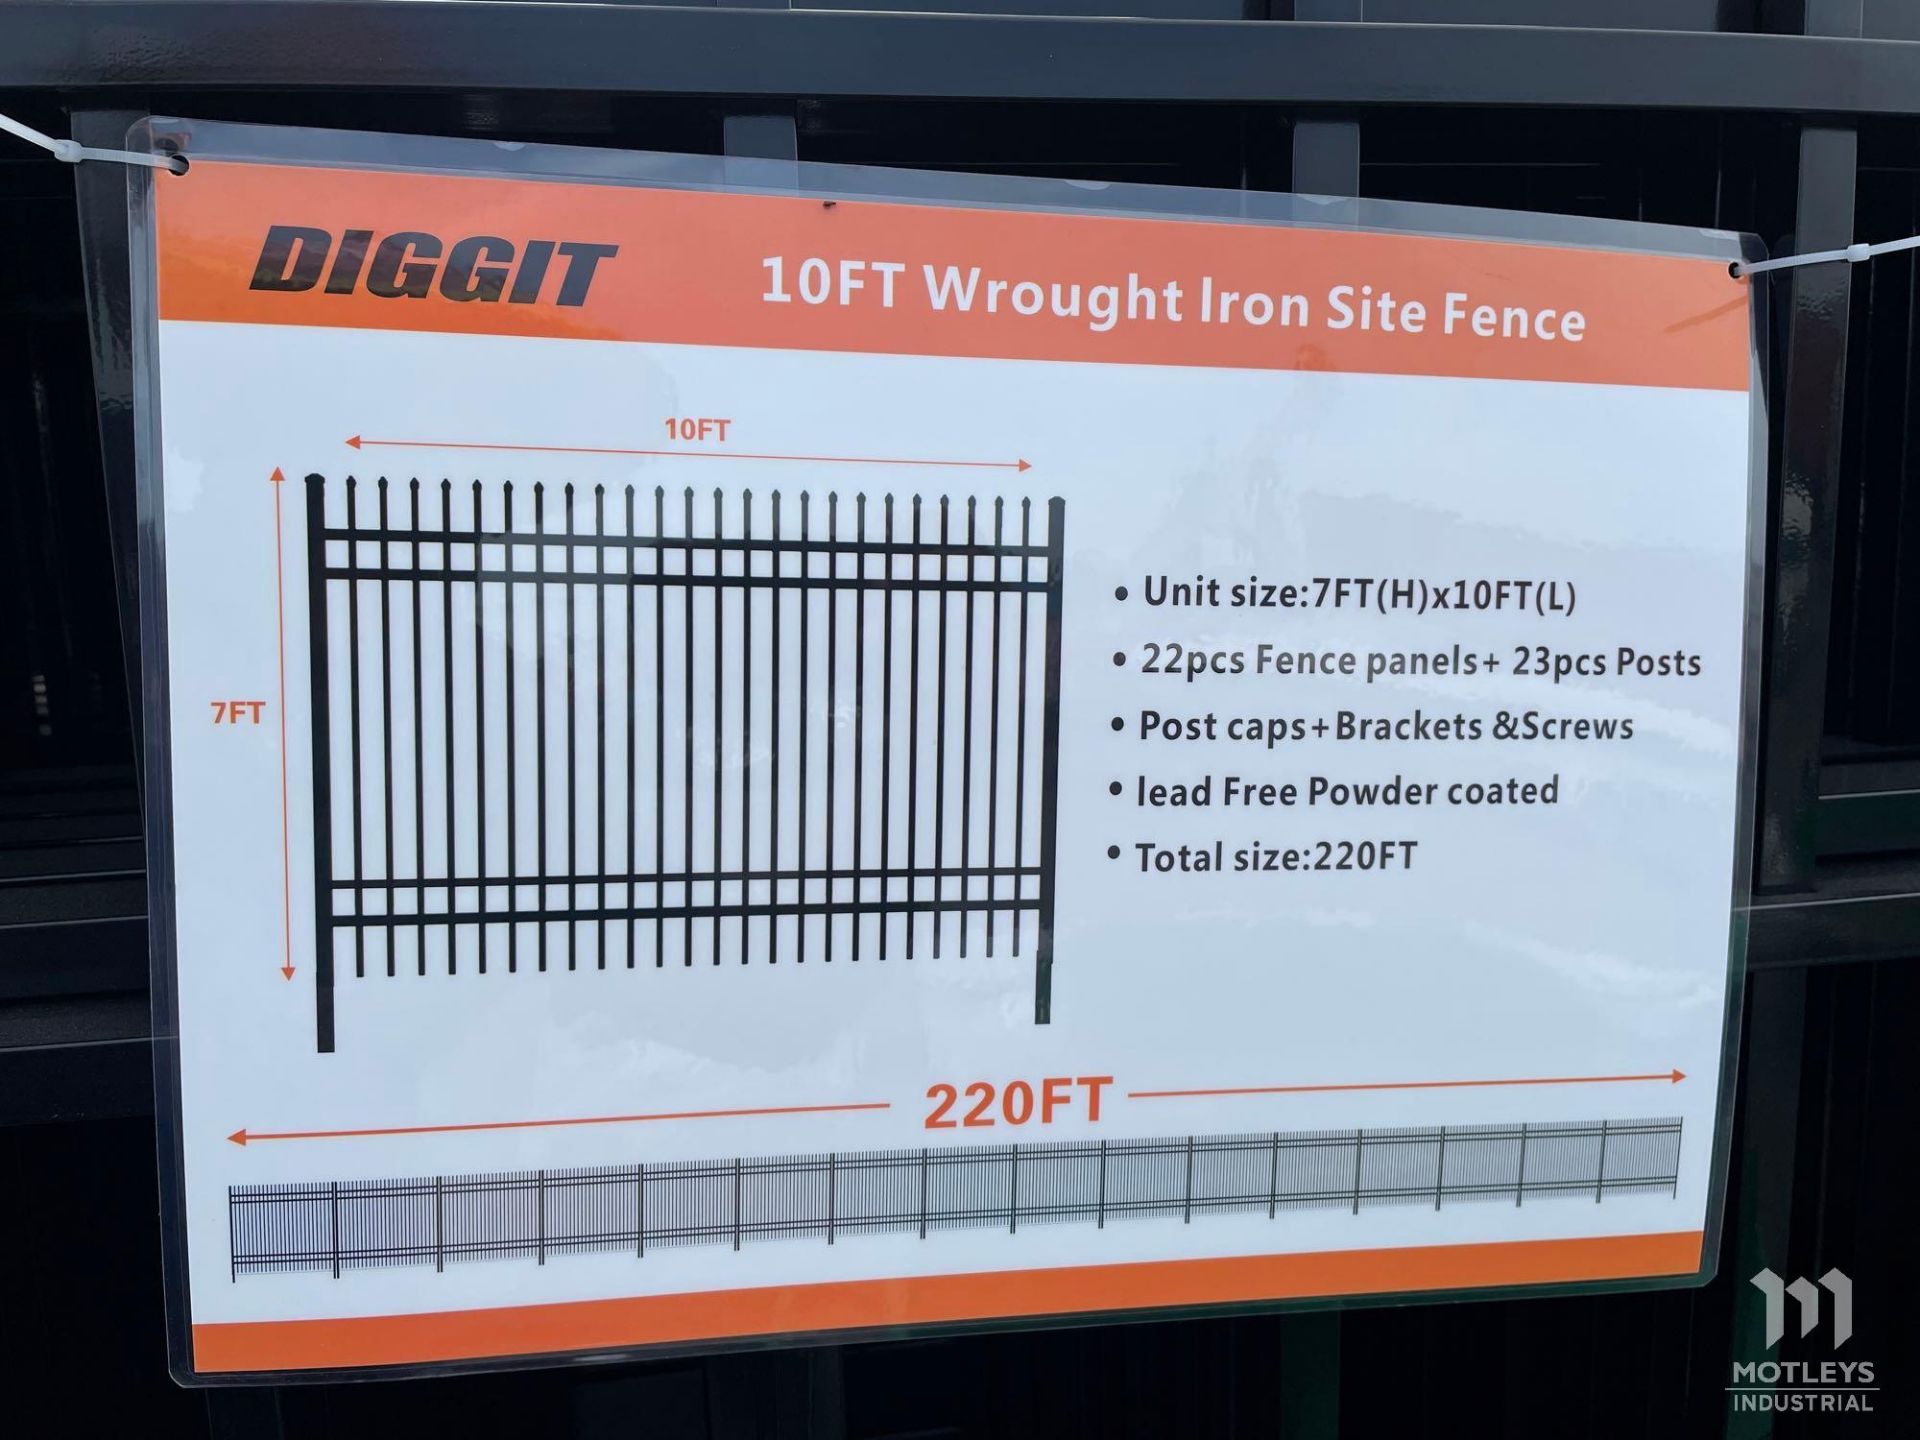 Diggit F10 Wrought Iron Fencing - Image 5 of 8